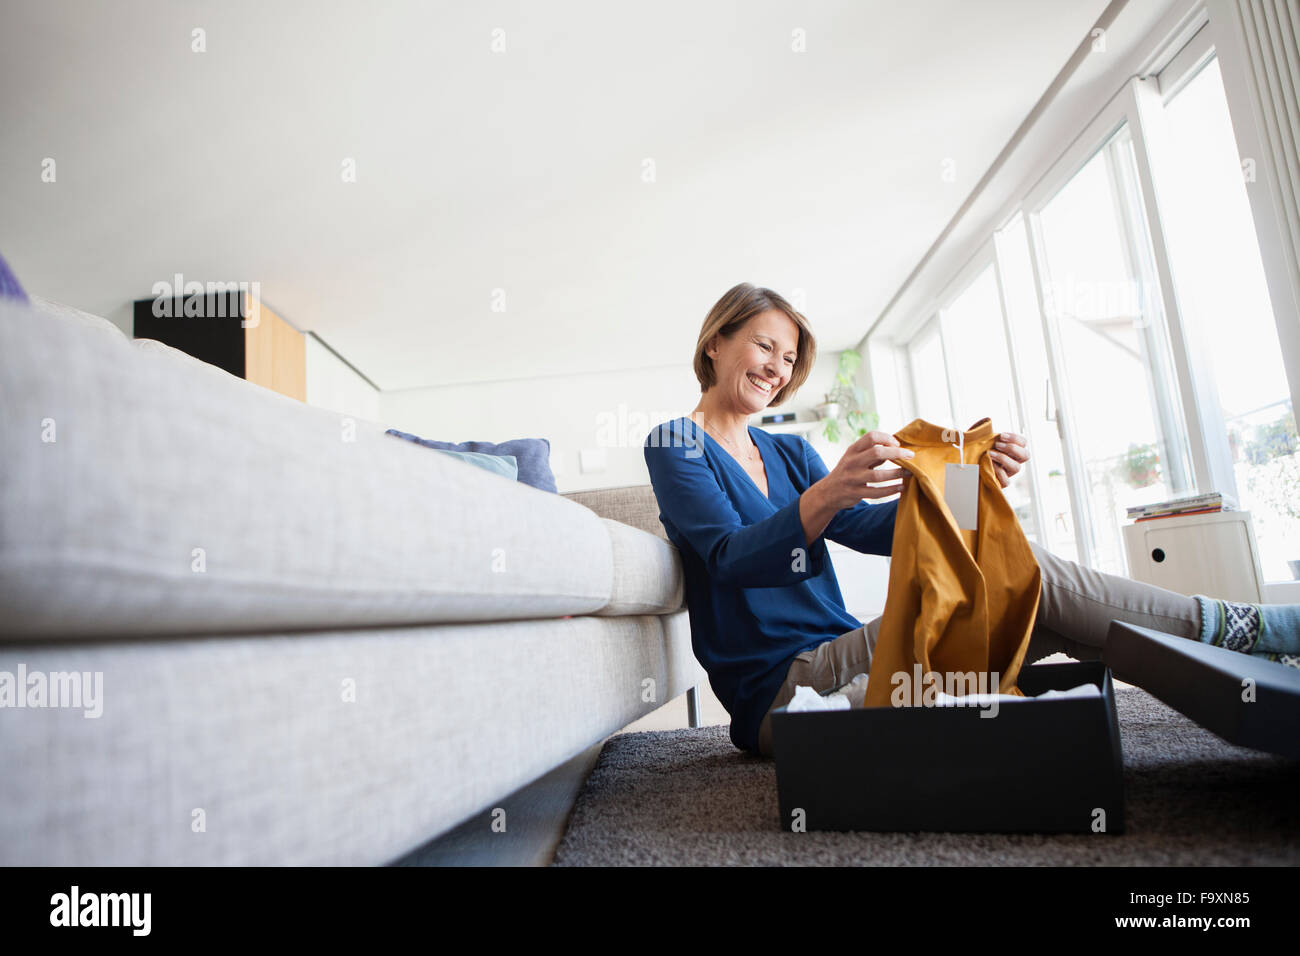 Smiling woman at home unpacking parcel with garment Stock Photo